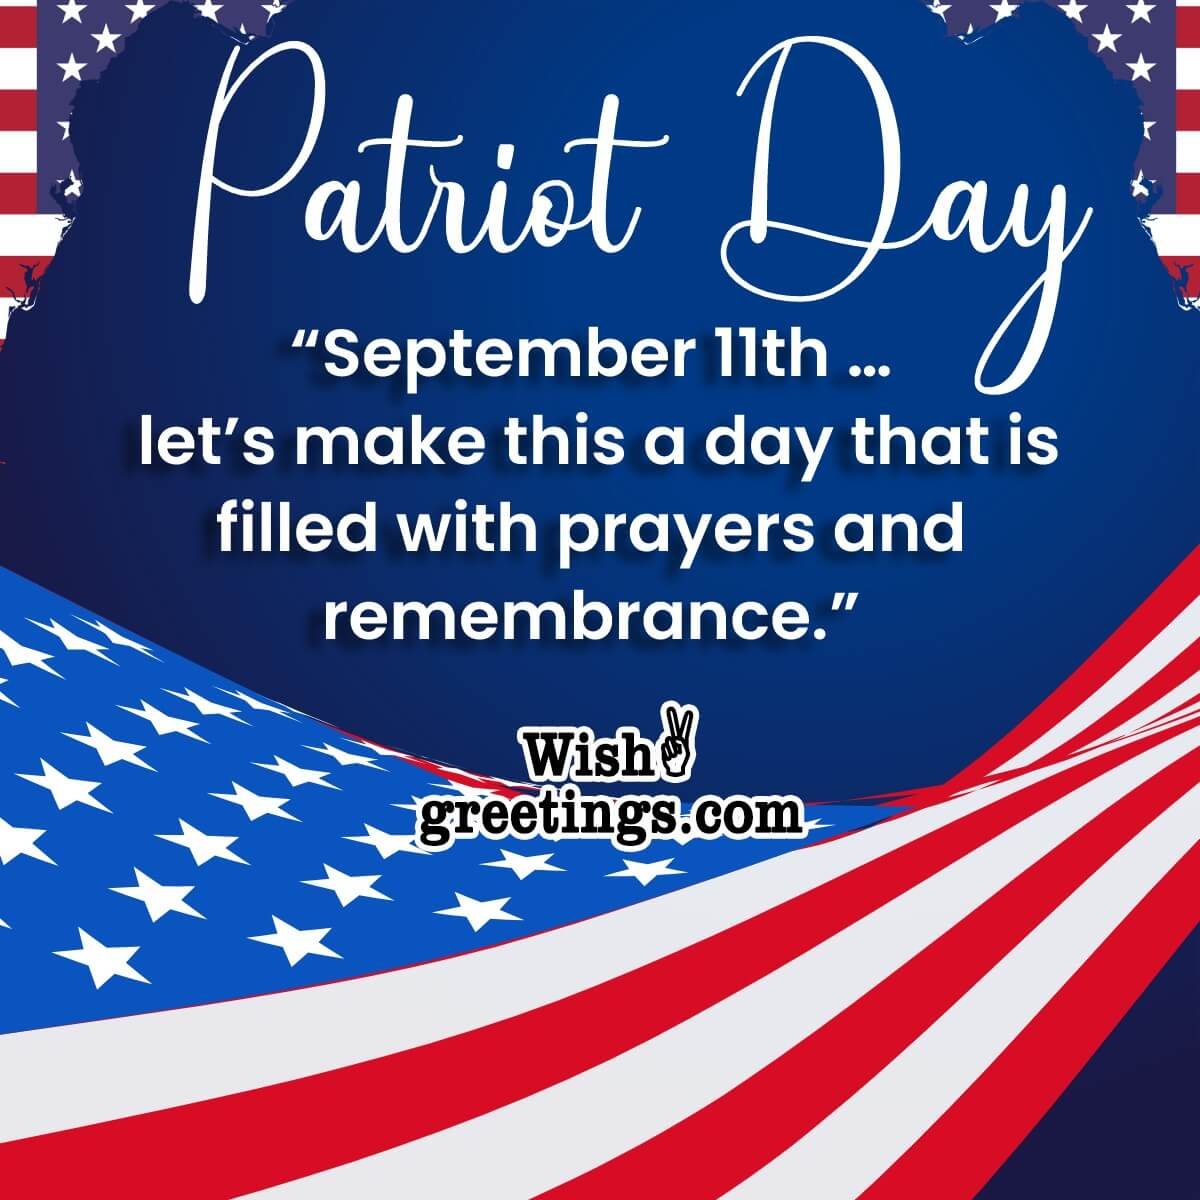 Patriot Day Message